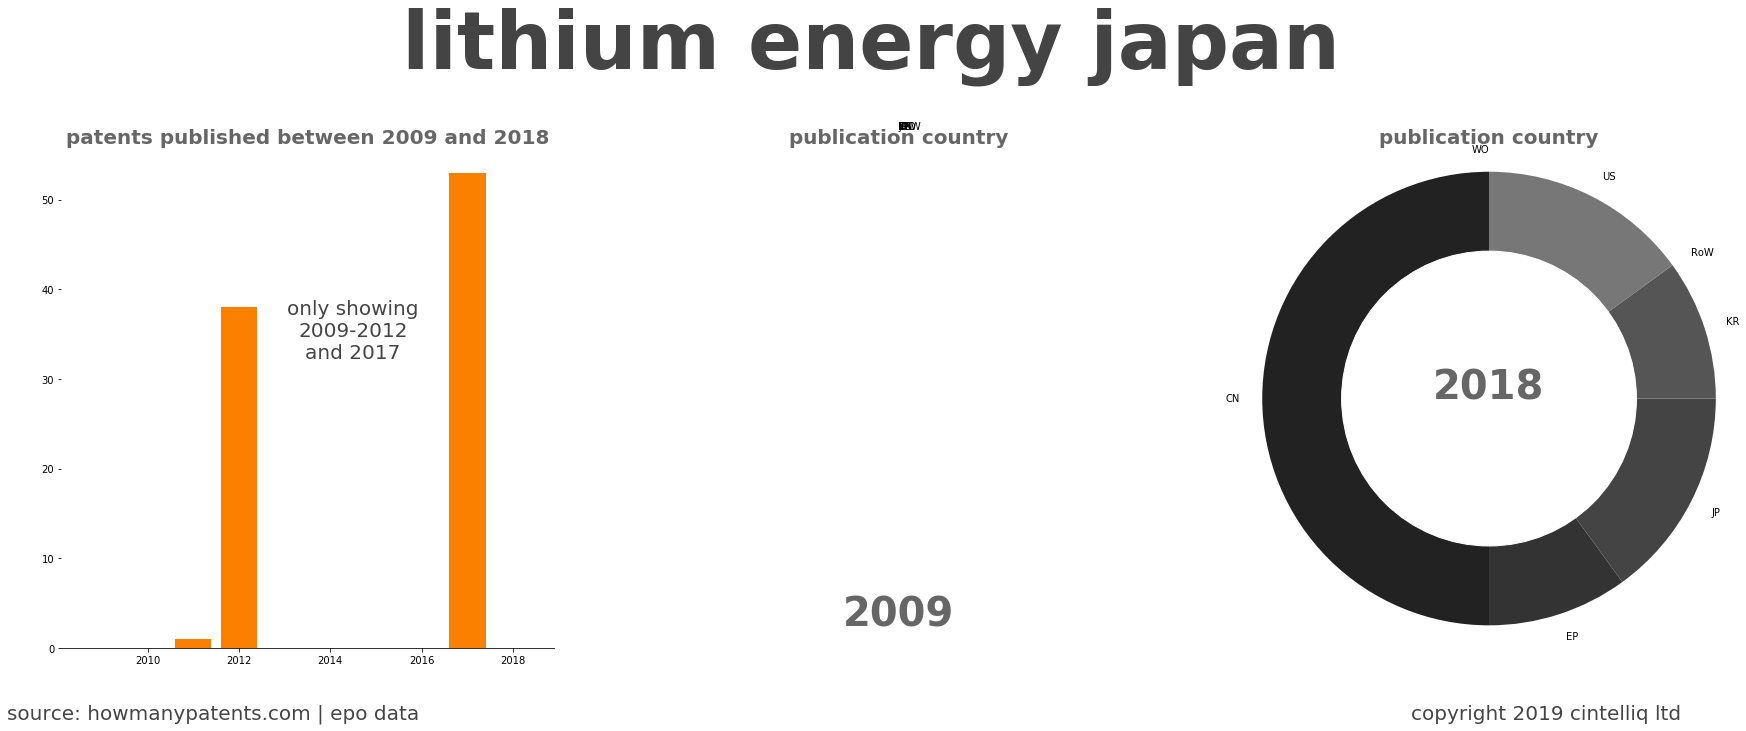 summary of patents for Lithium Energy Japan